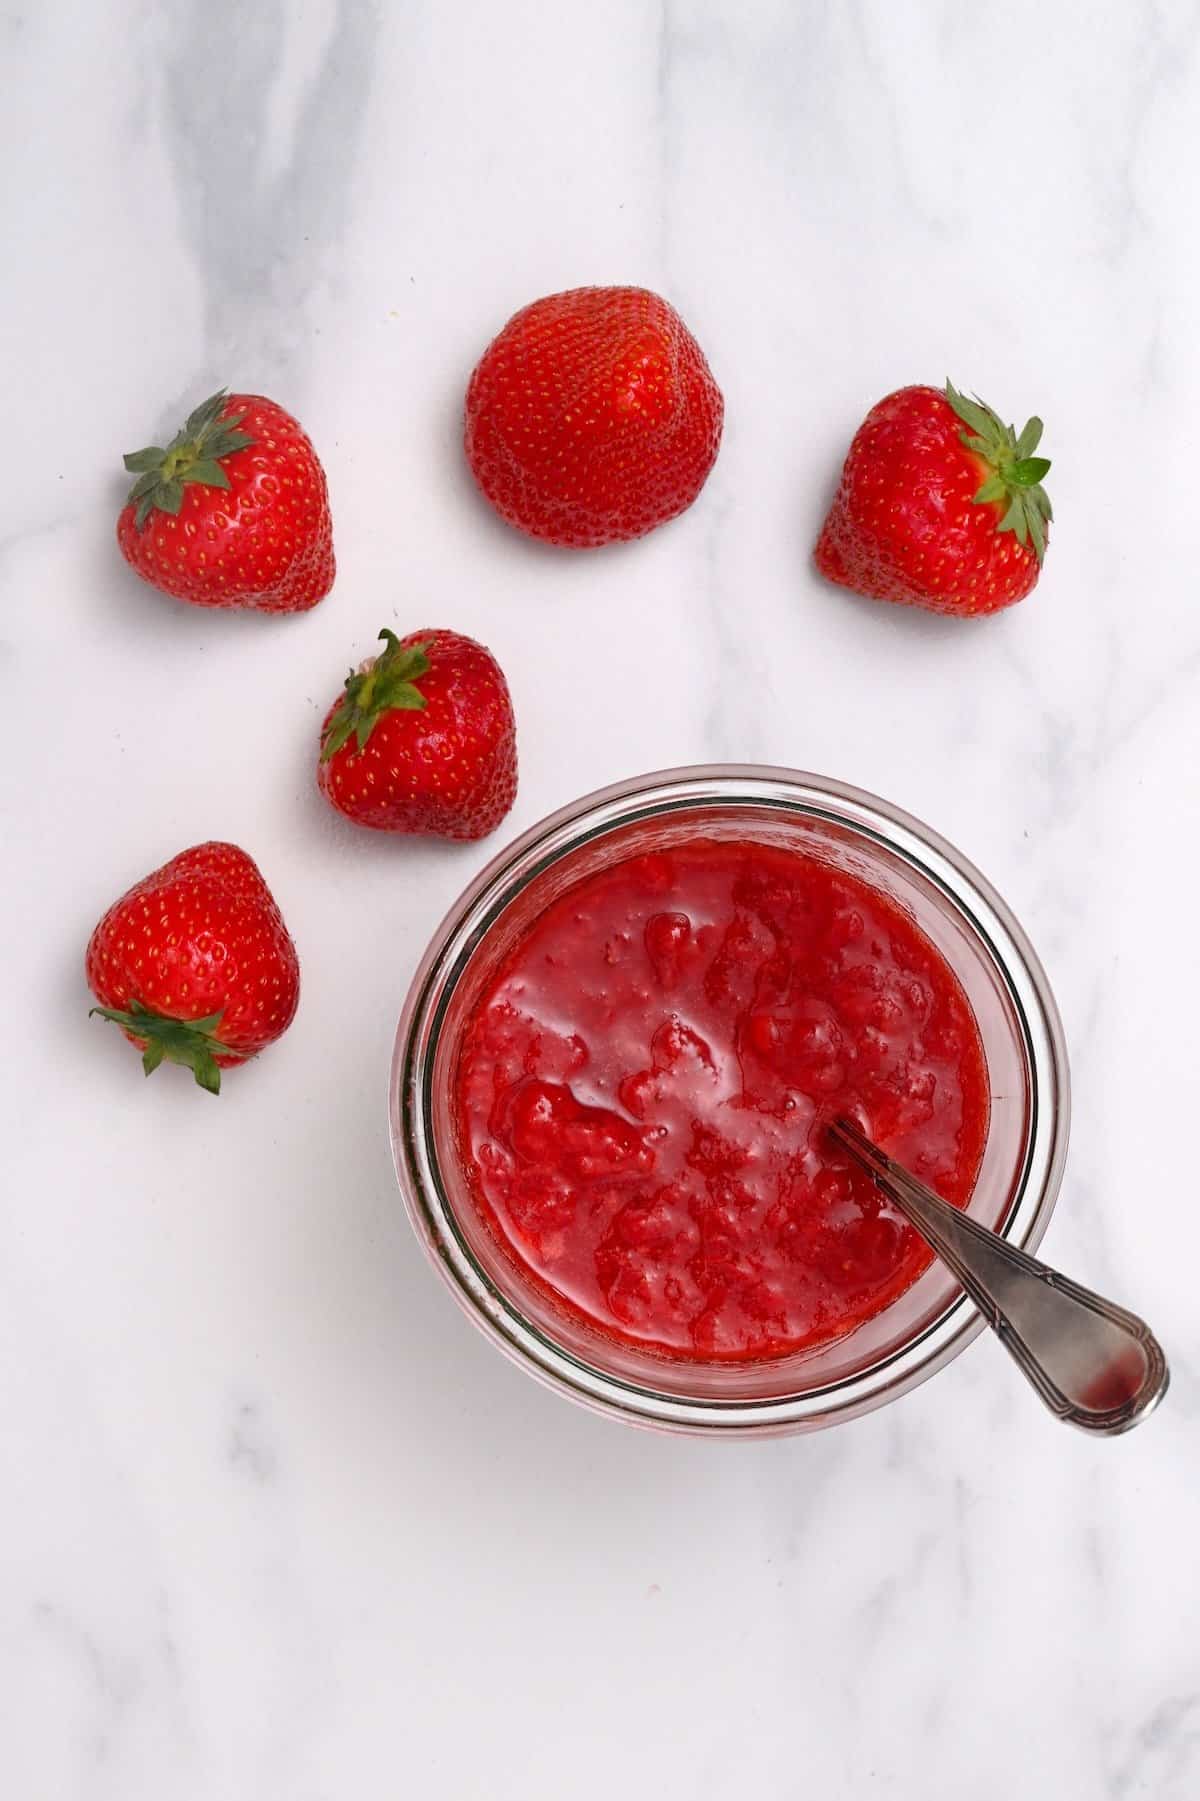 Strawberries and a jar with compote